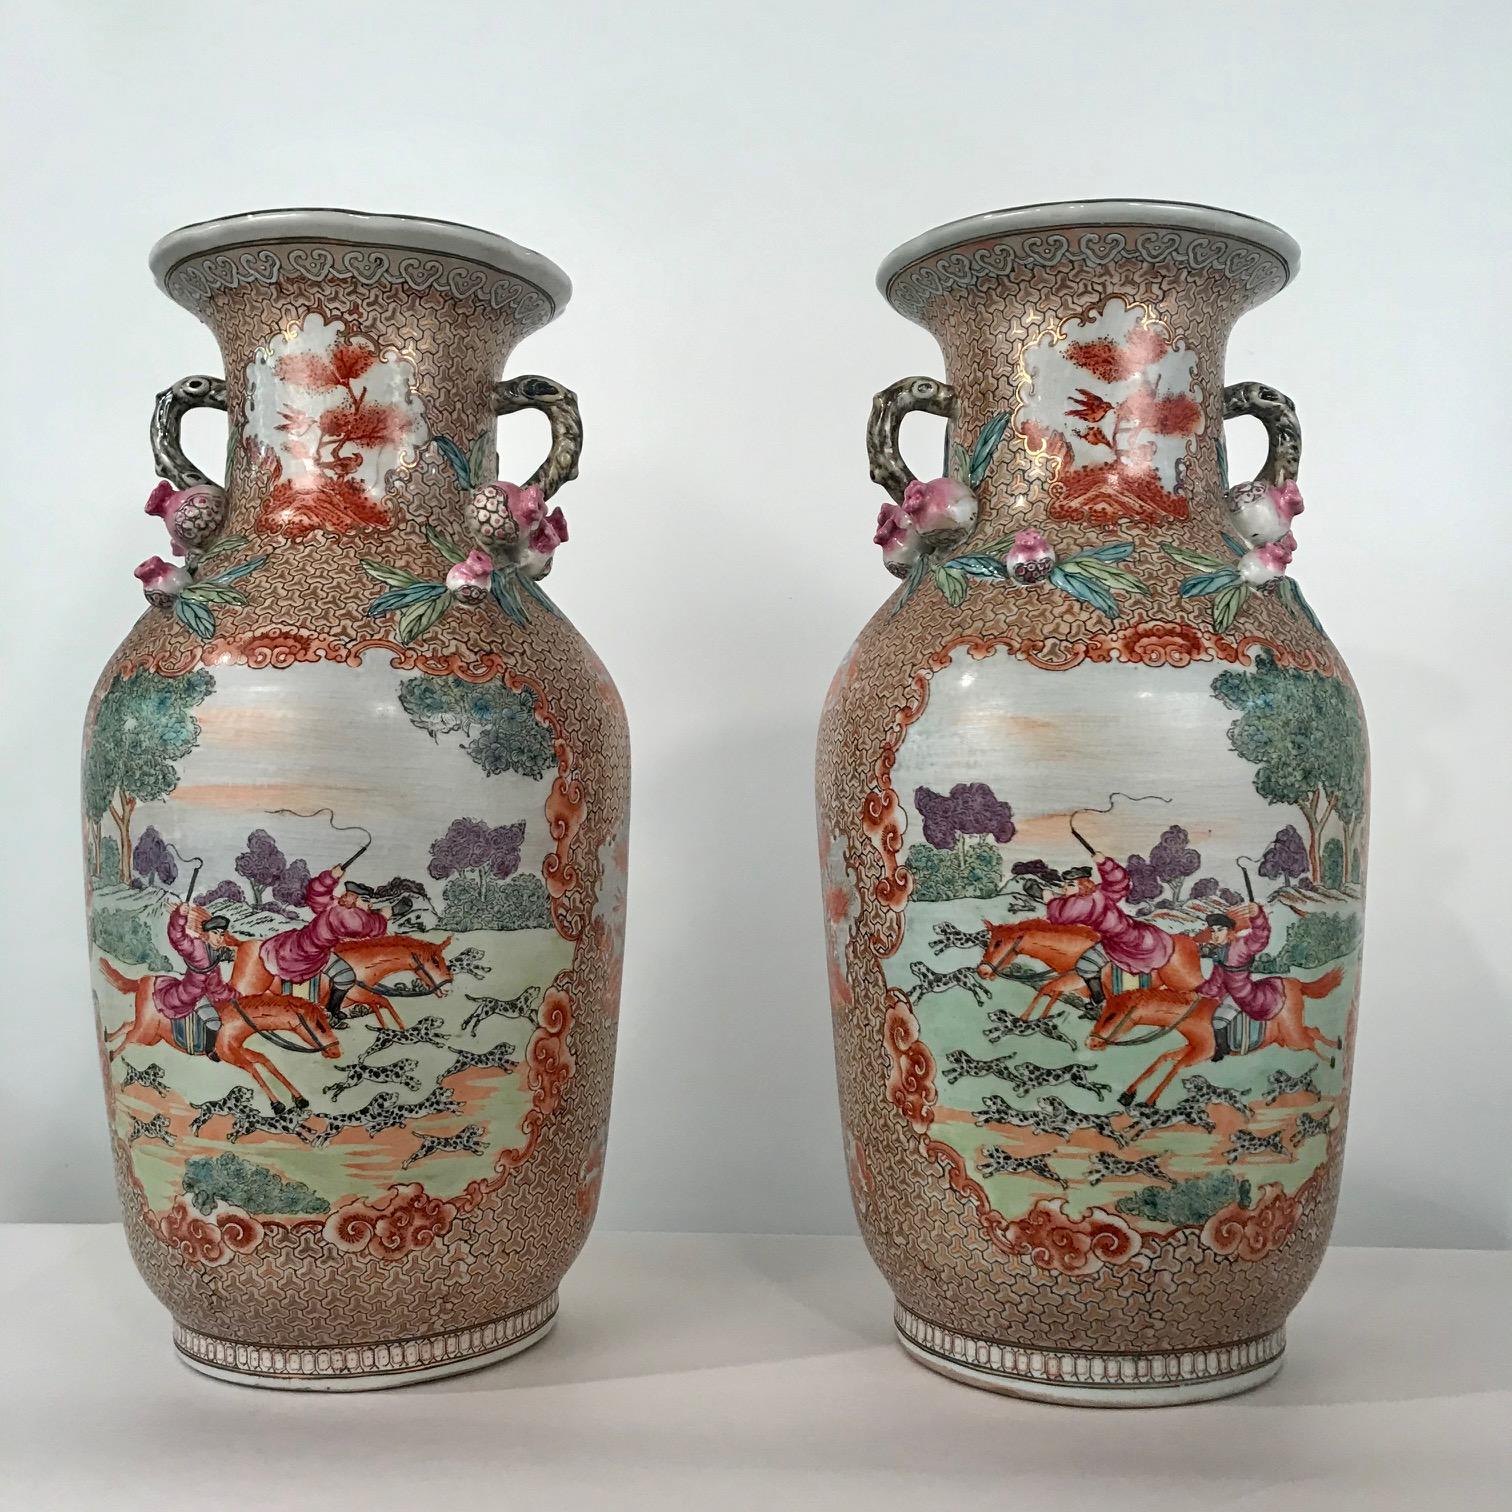 This pair of baluster vases, painted in the manner of the Export ware of the 18th century, combine a highly decorative gilt and painted ground with large and playful scenes in reserves…a French(?) gentleman and his son, hot on the chase. At their